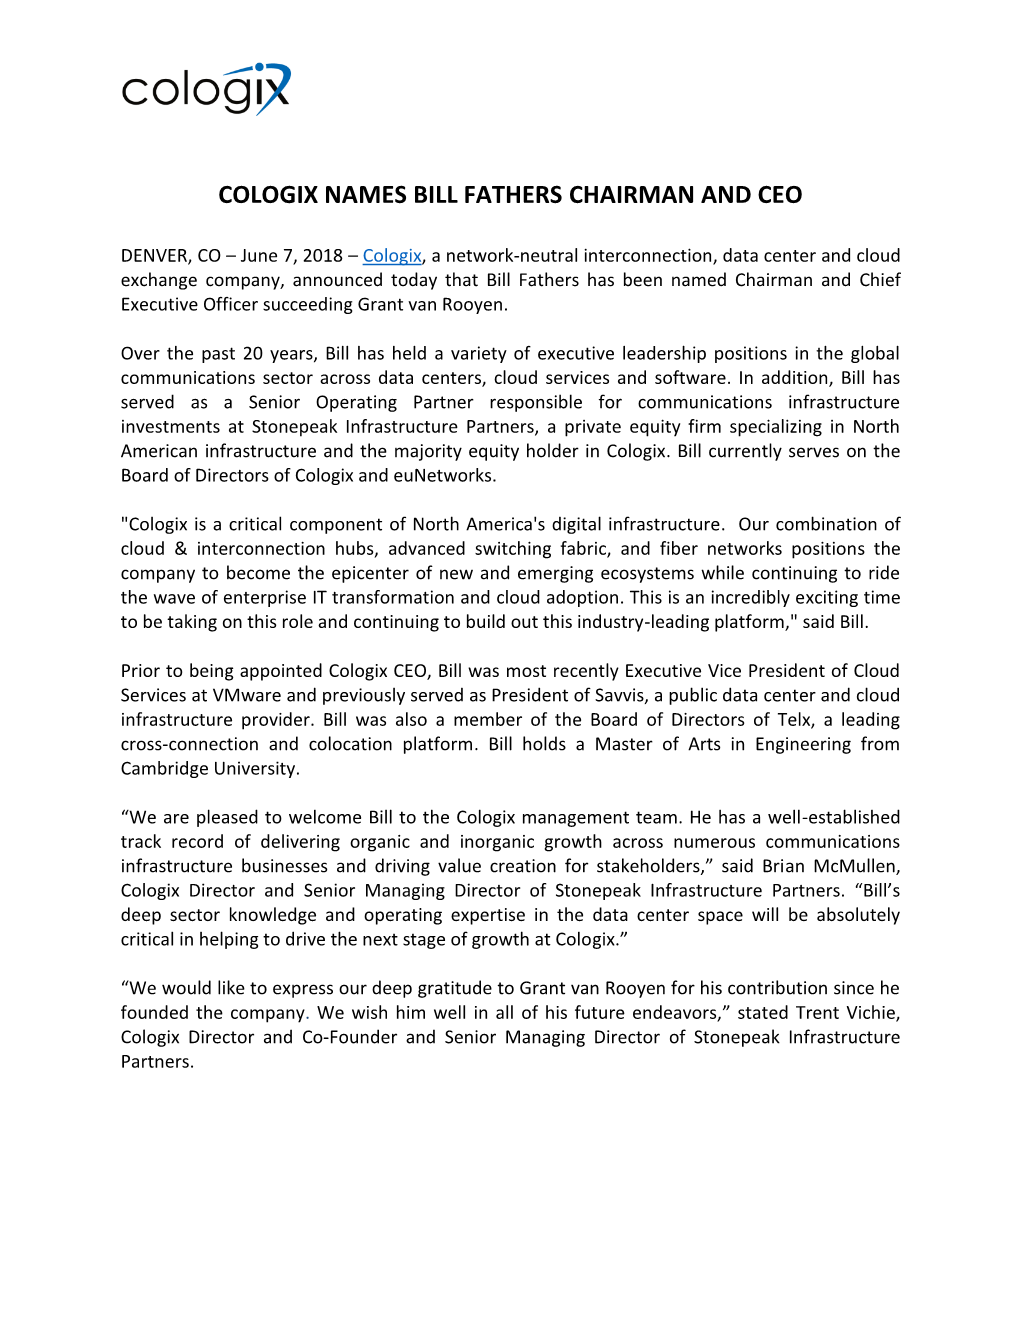 Cologix Names Bill Fathers Chairman and Ceo